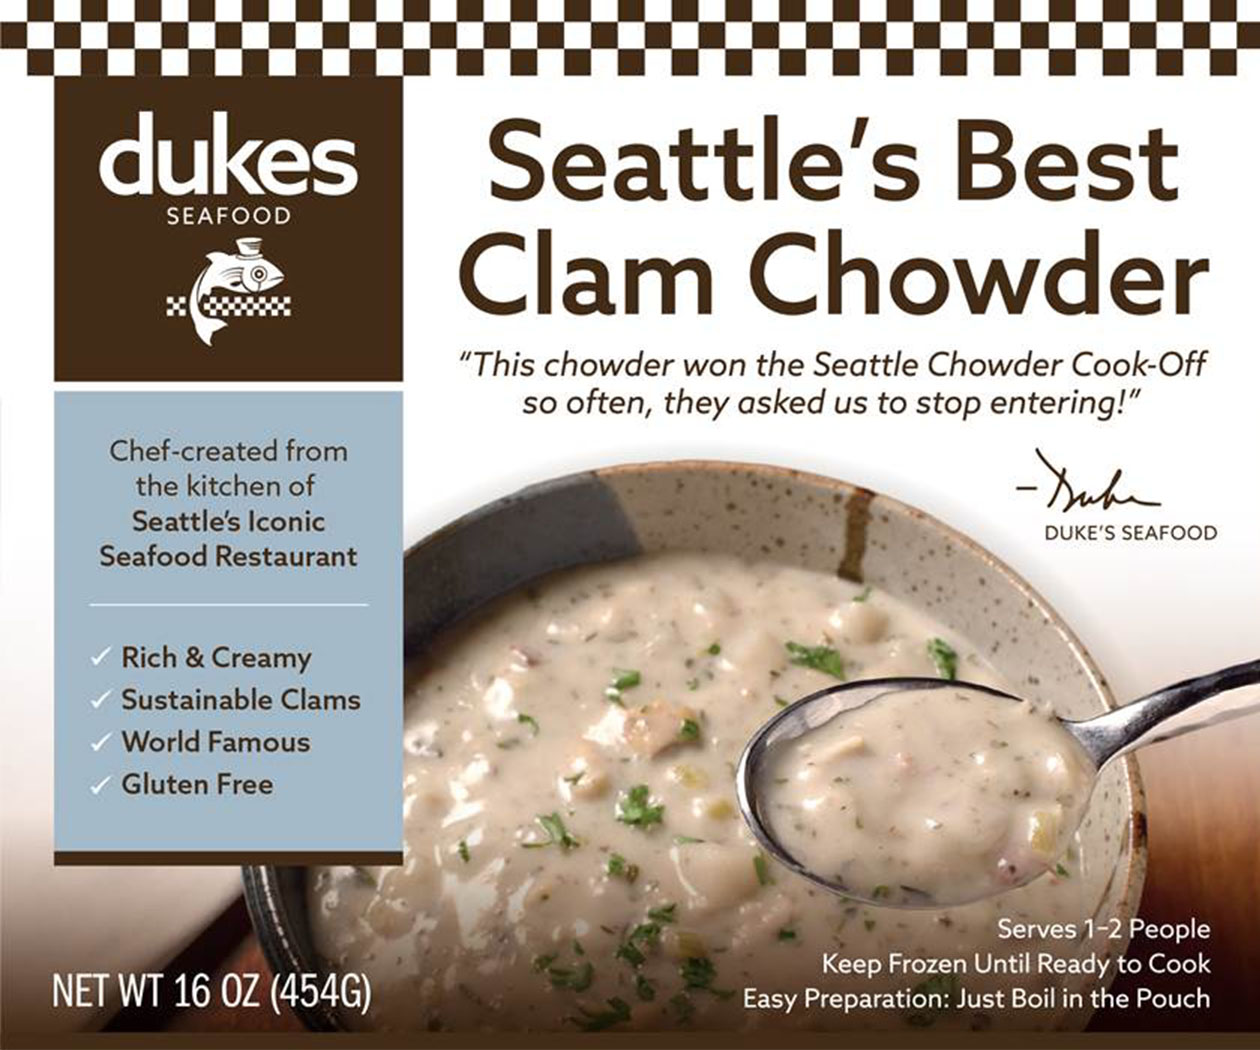 Duke's Seafood Seattle's Best Clam Chowder